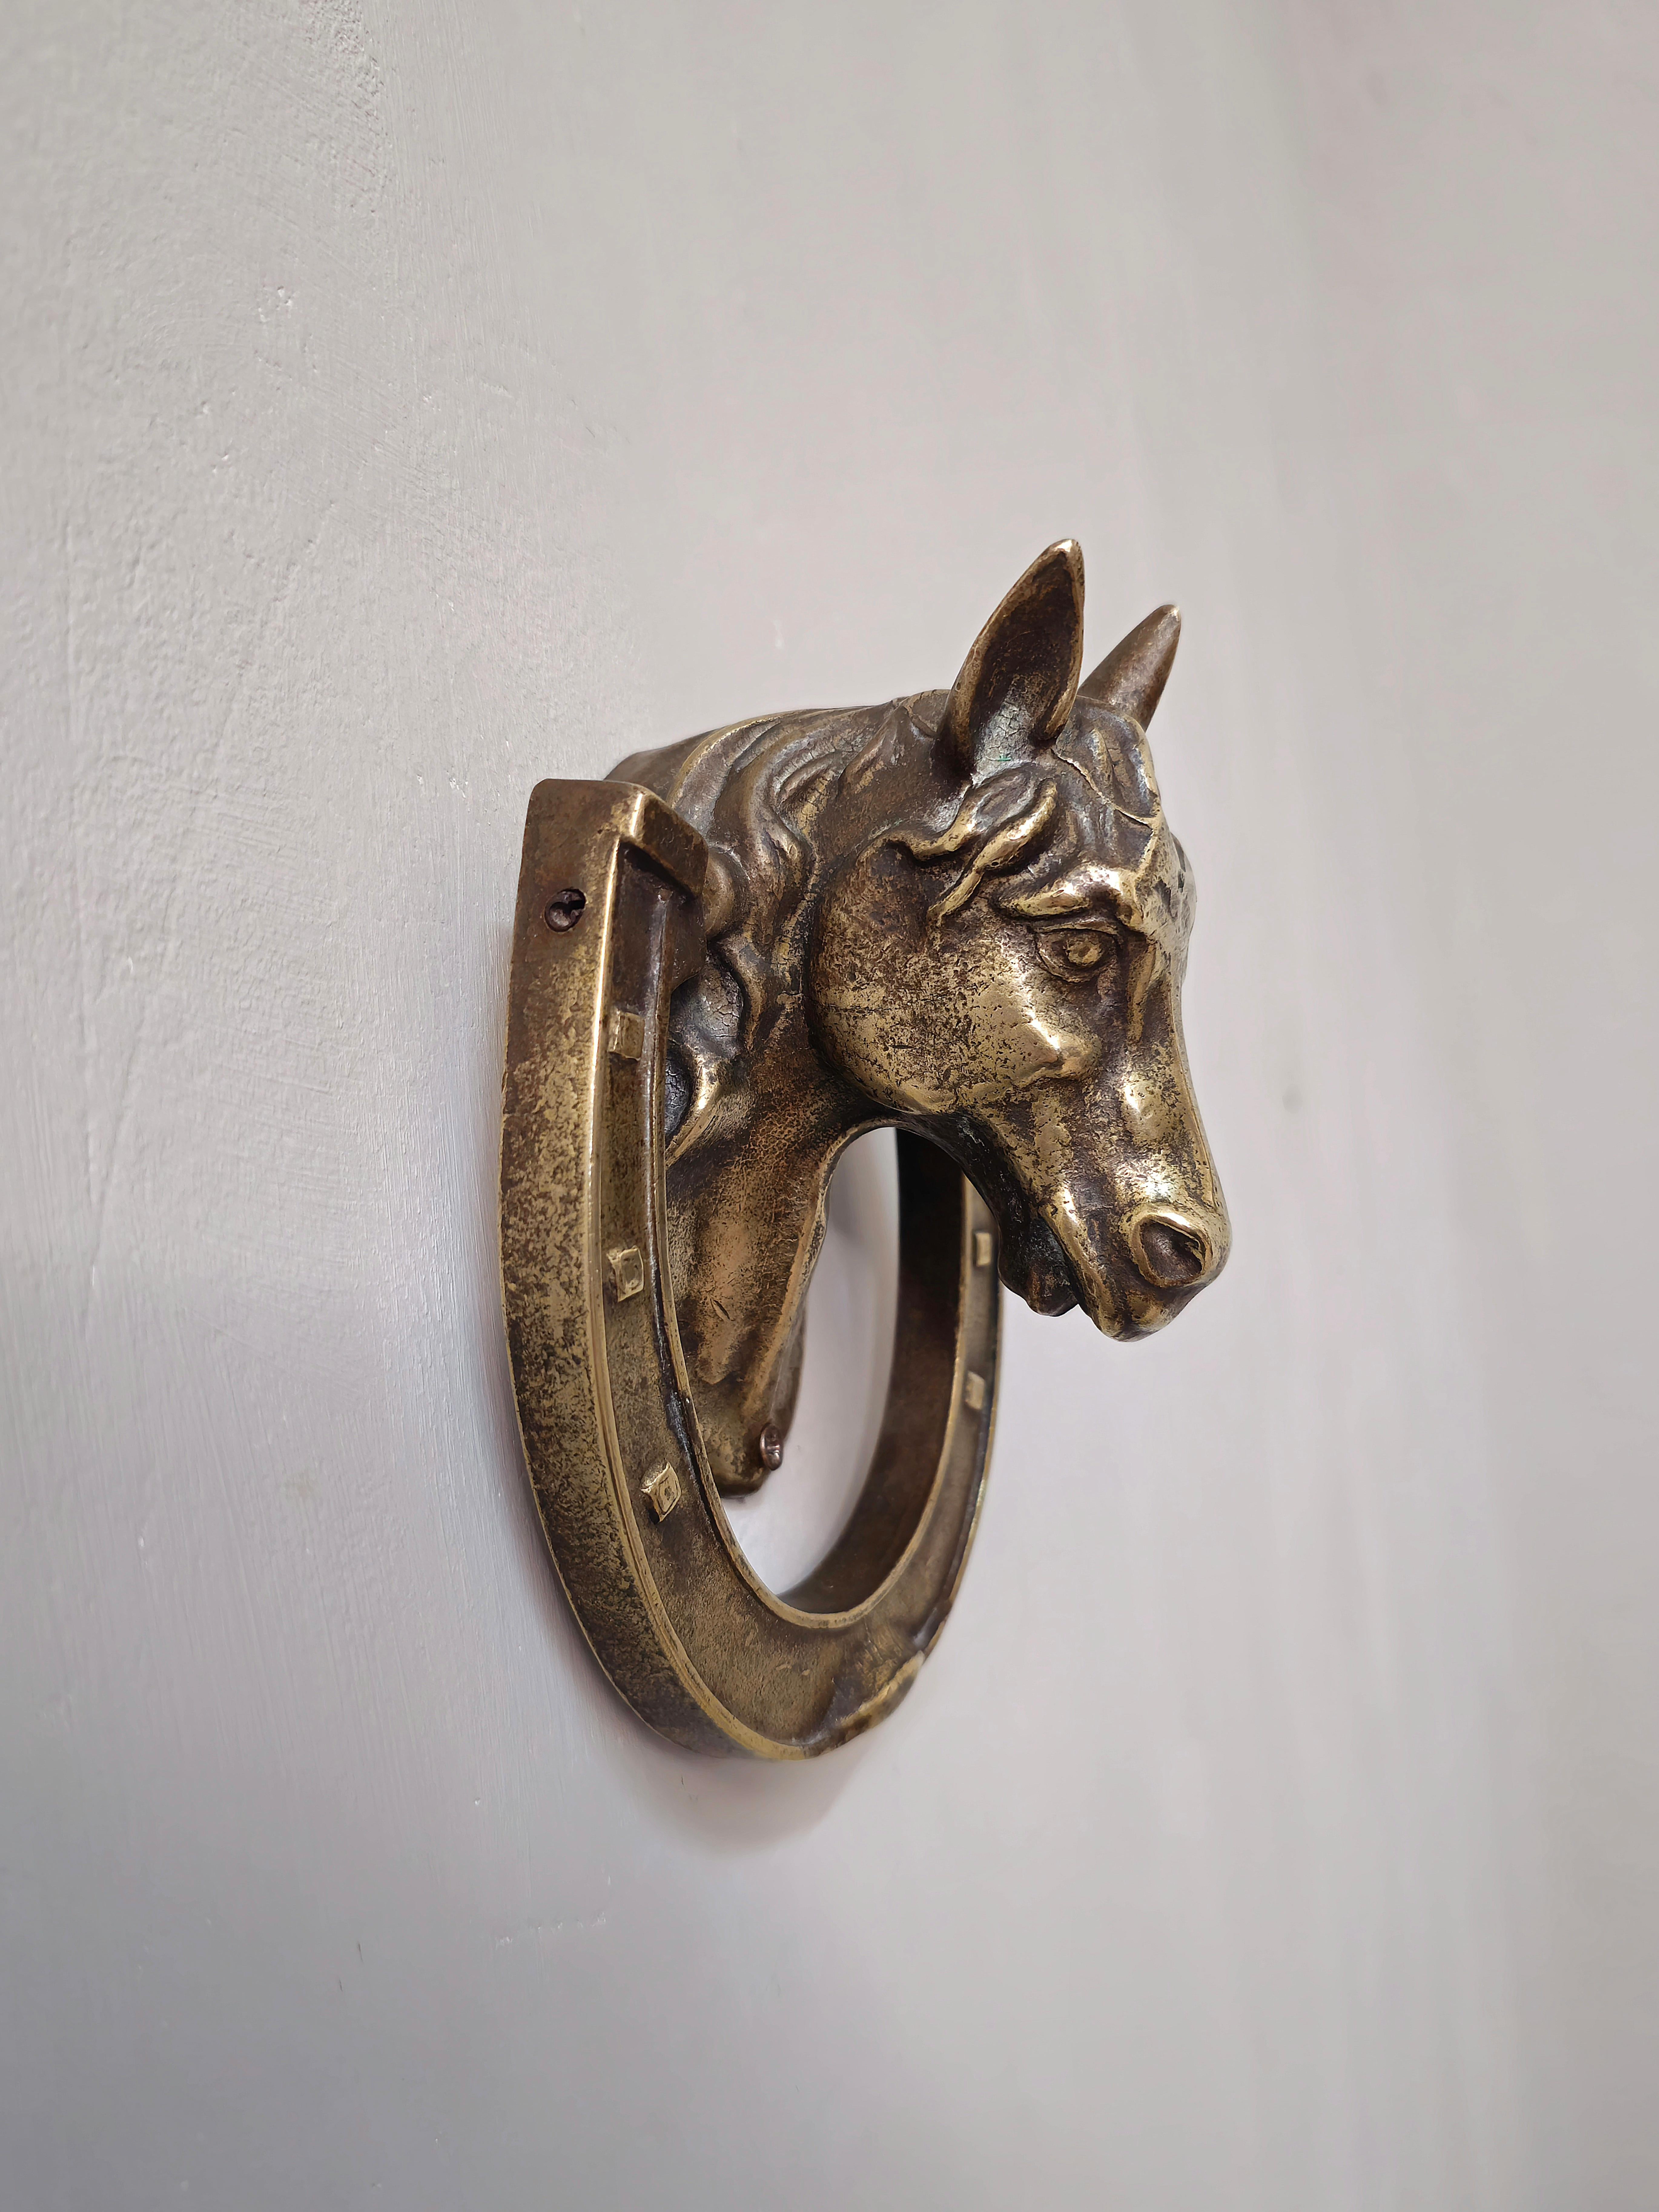 Mid century Brass Door Knocker.  Depicting a horse's head with moving hoof. 

Weight: 900 grams

Note: We try to offer our customers an excellent service even in shipments all over the world, collaborating with one of the best shipping partners,